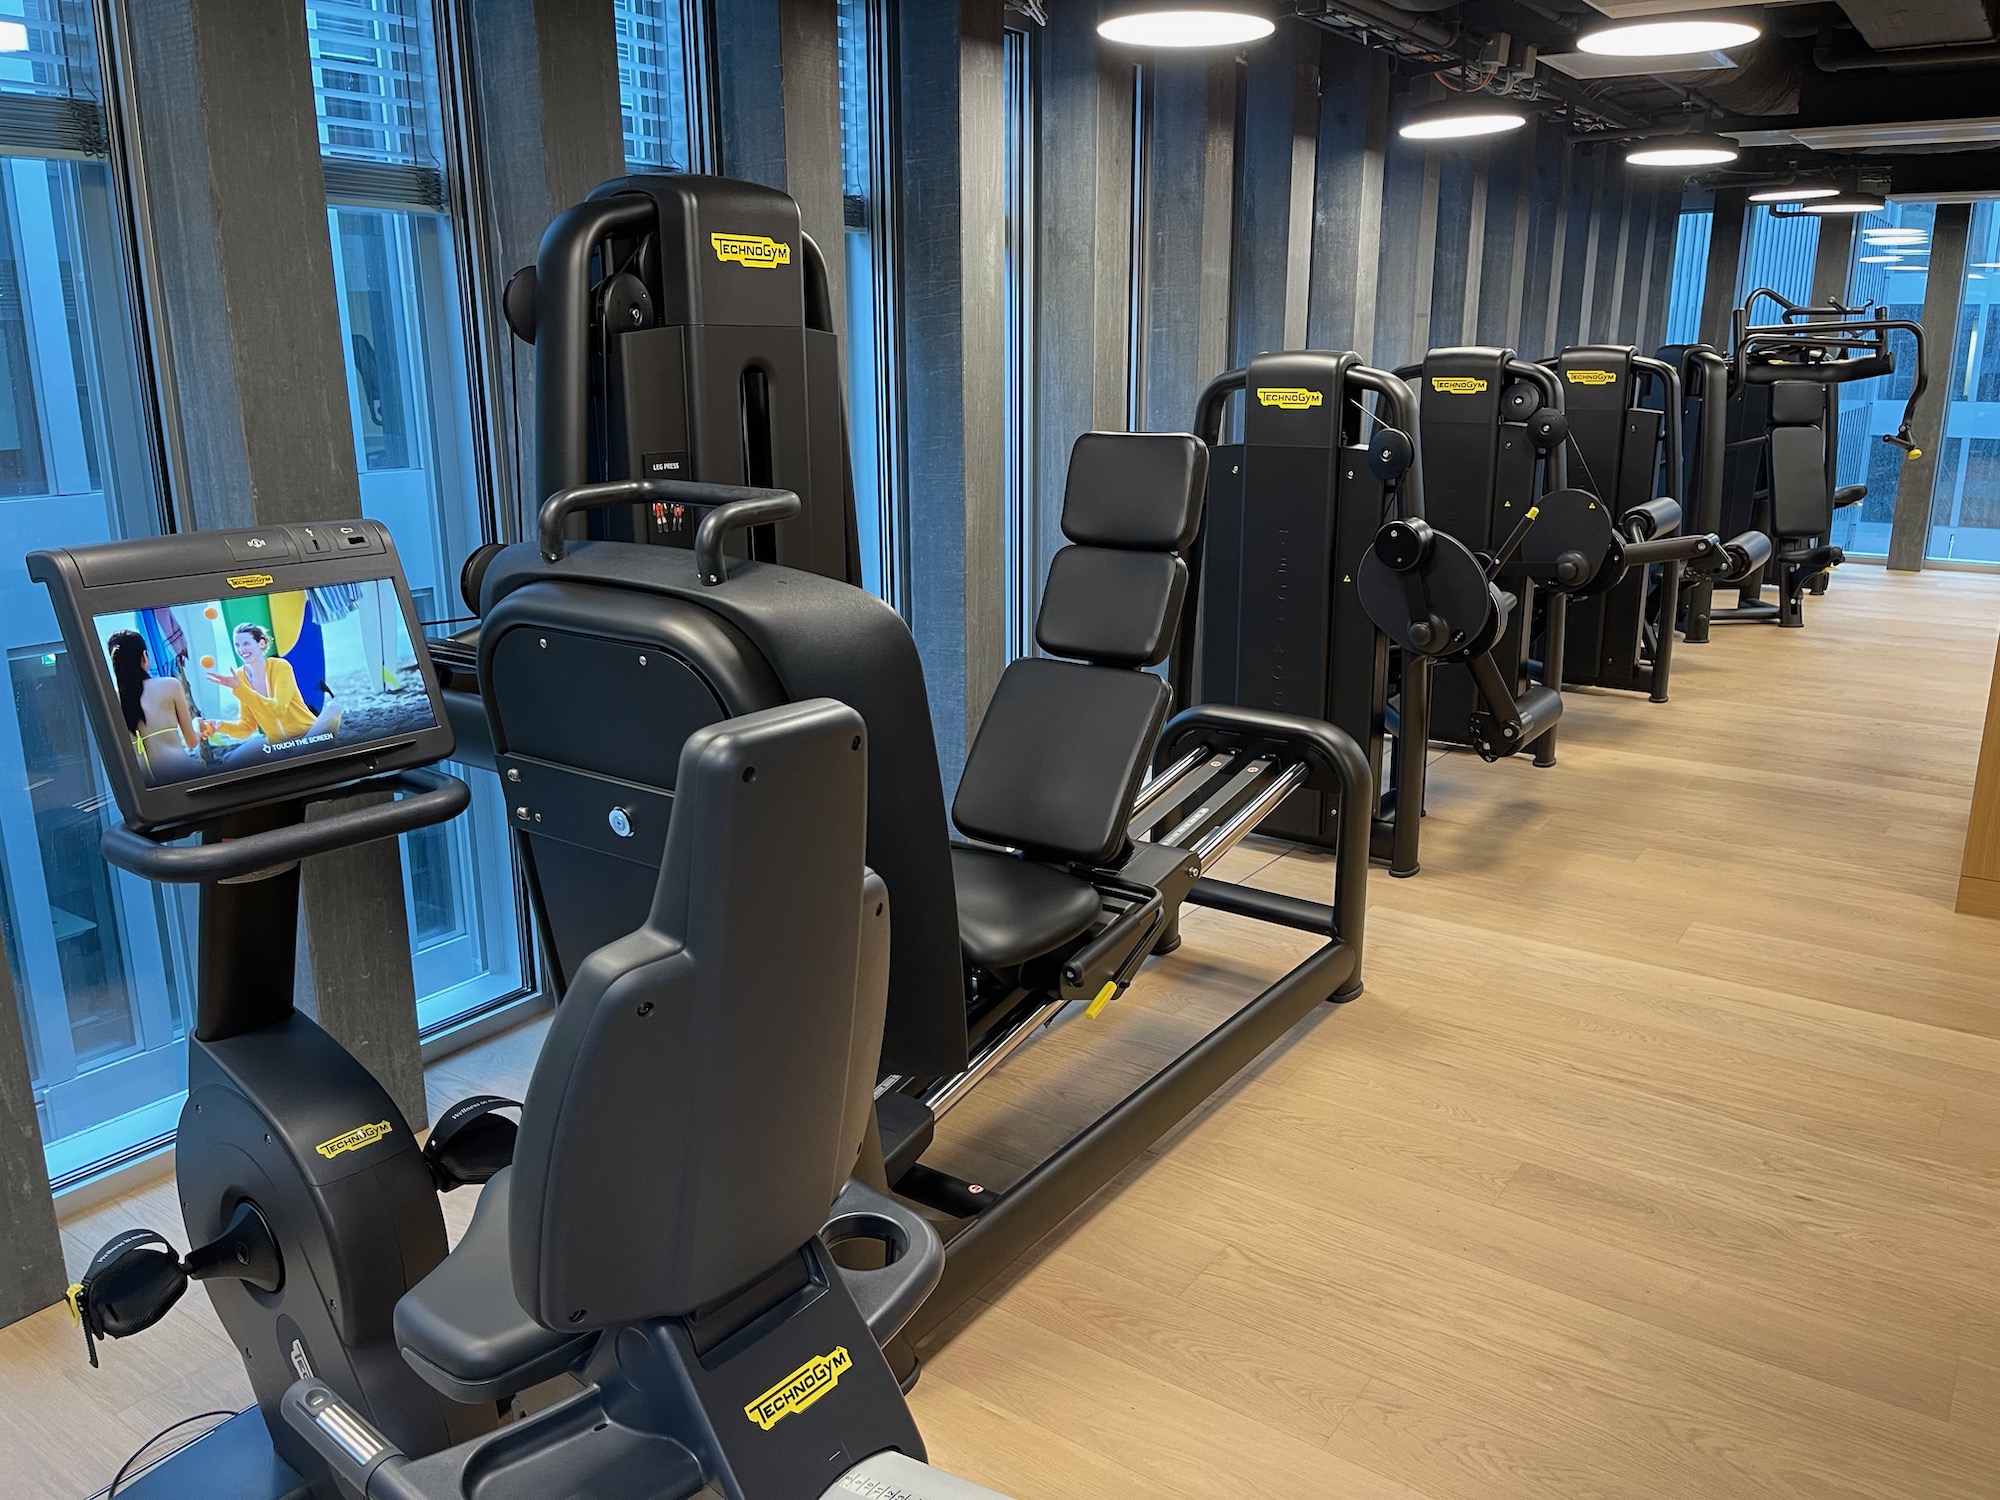 a row of exercise machines in a gym